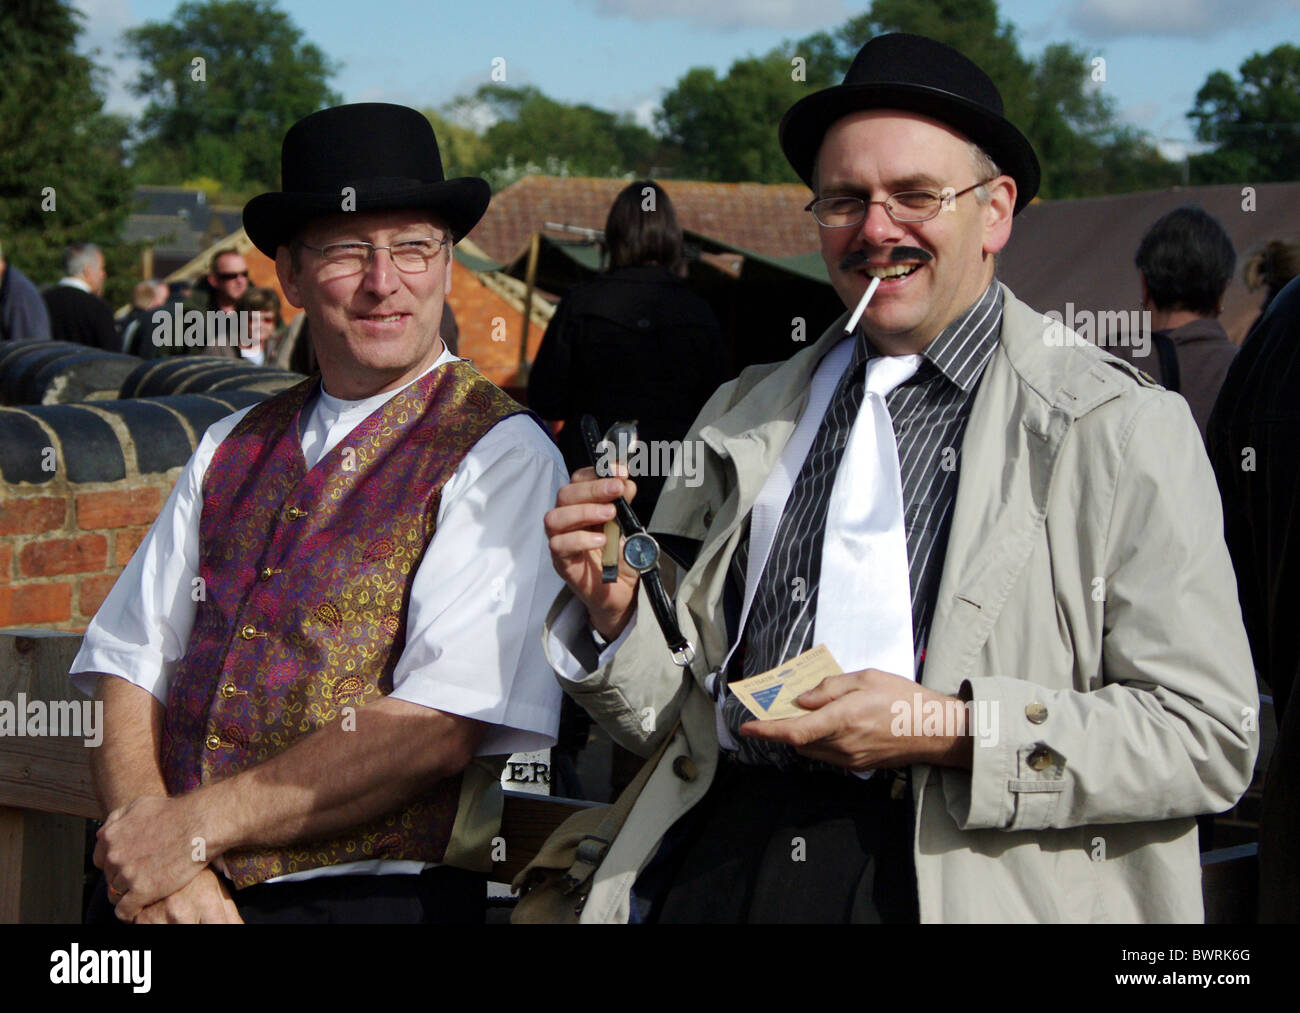 Two re-enactors dressed as spivs at a forties event in Stoke Bruerne, Northamptonshire, UK Stock Photo